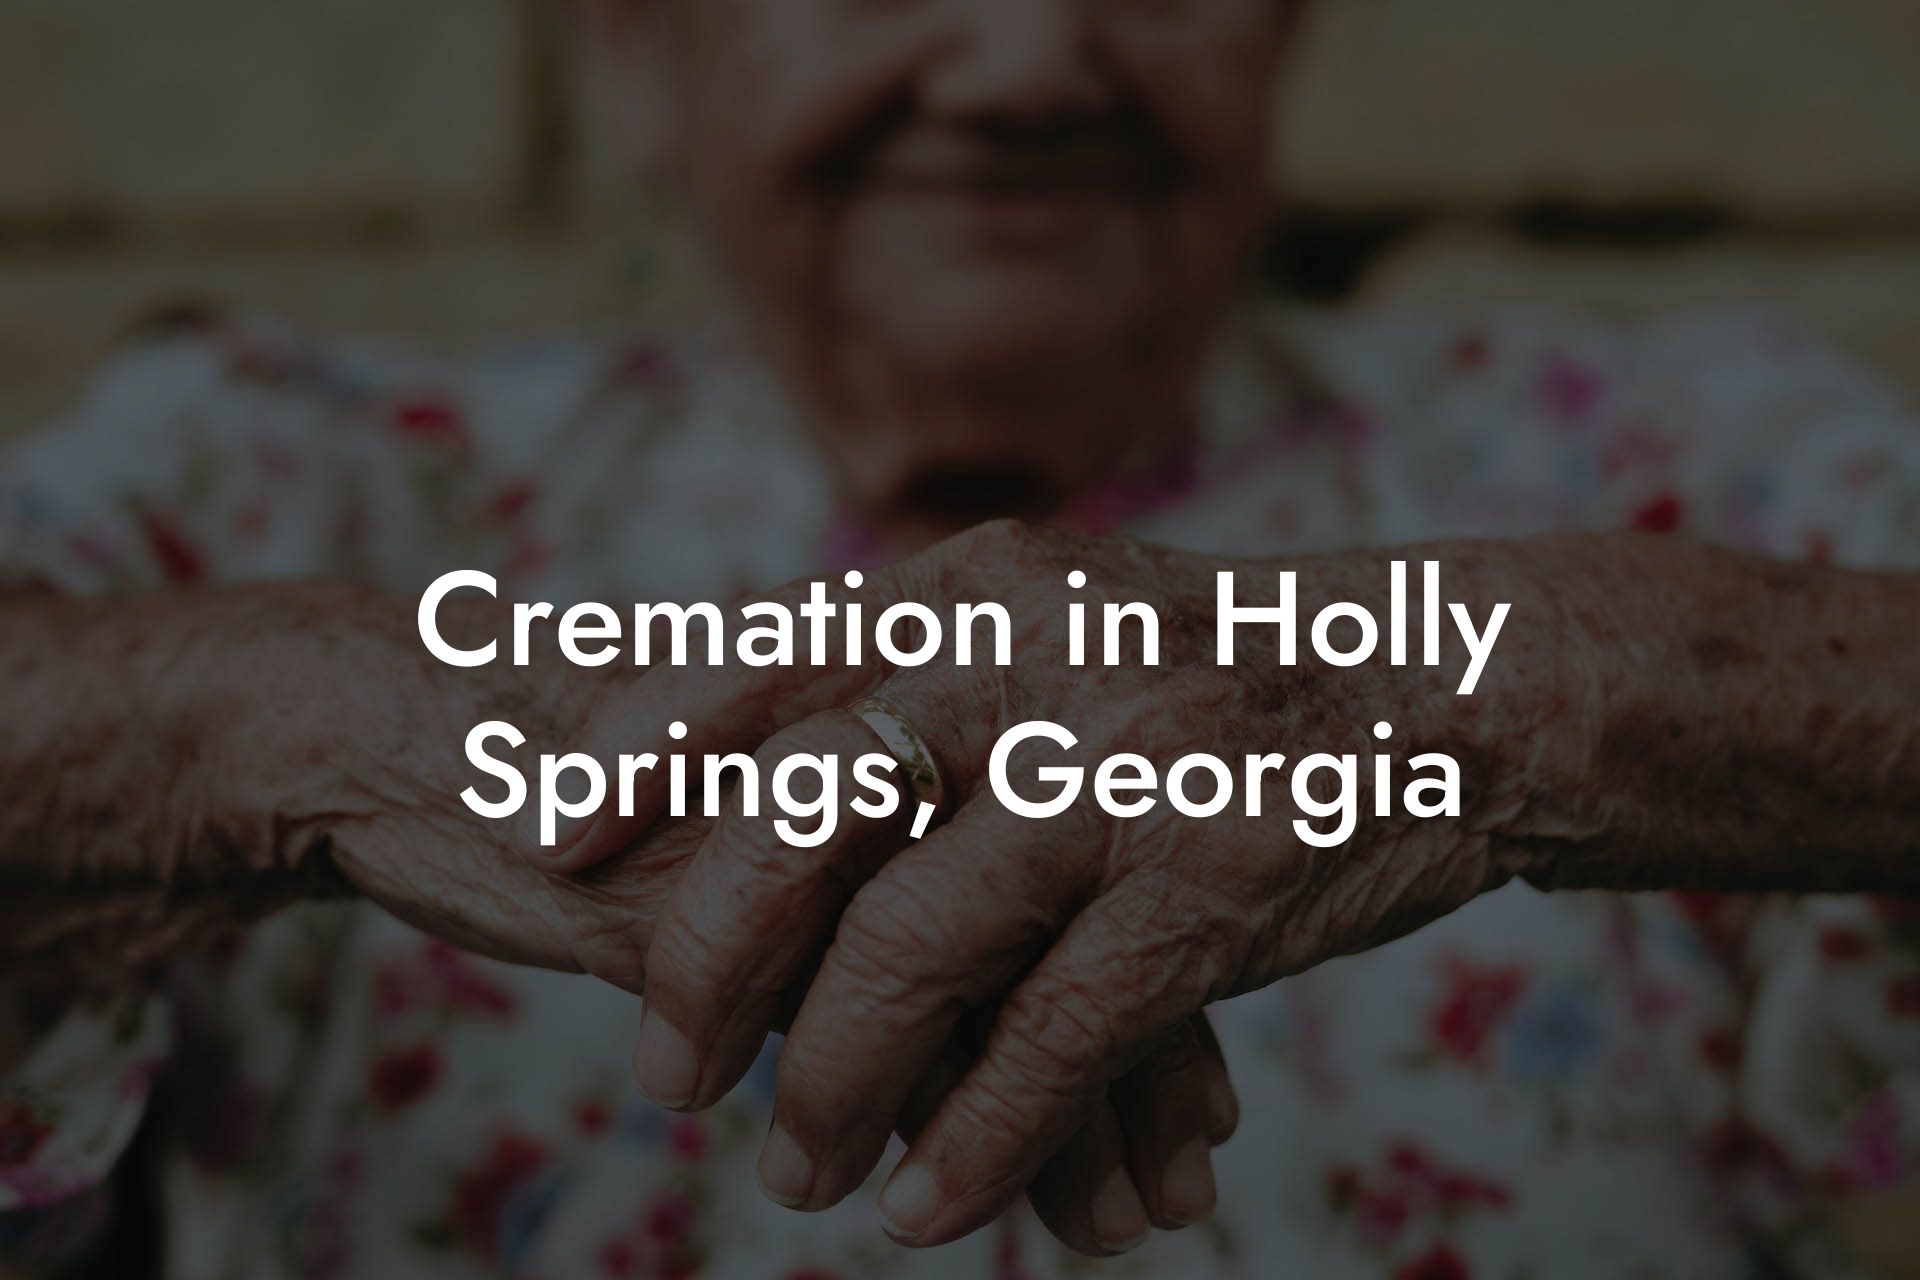 Cremation in Holly Springs, Georgia